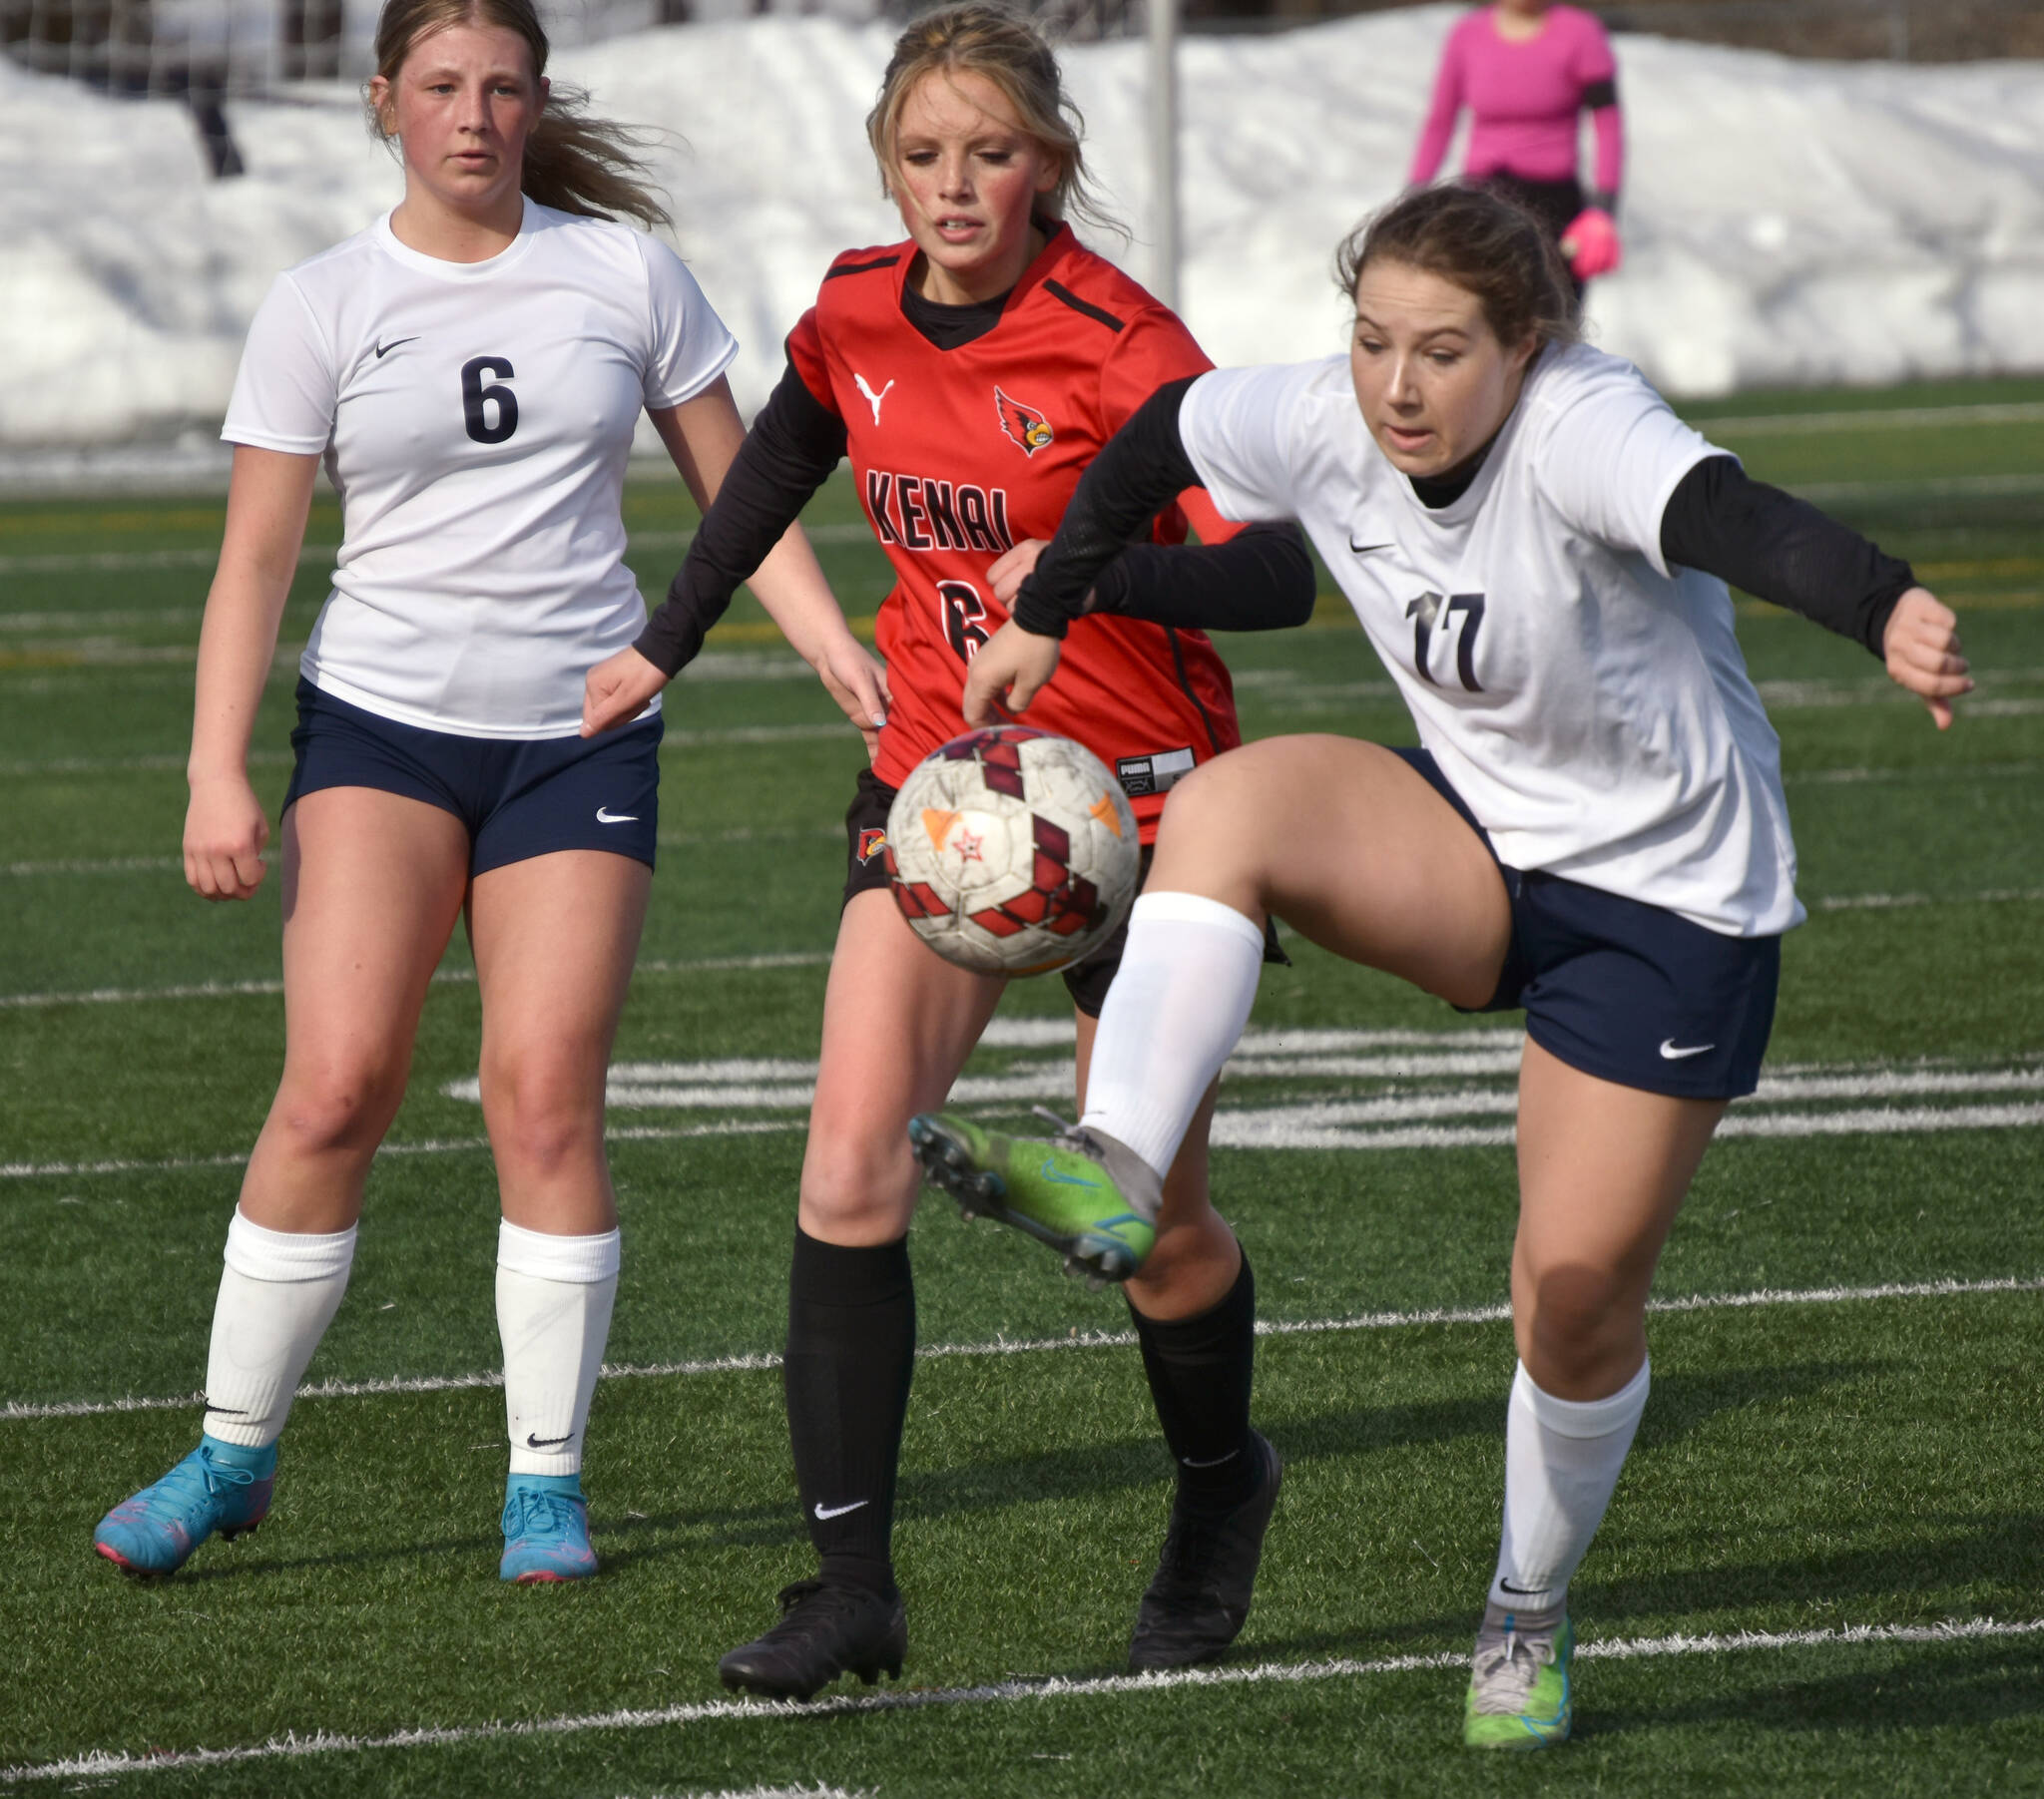 Soldotna’s Liberty Miller controls the ball in front of Kenai Central’s Kori Moore and Soldotna’s Alex Lee on Tuesday, April 18, 2023, at Ed Hollier Field at Kenai Central High School in Kenai, Alaska. (Photo by Jeff Helminiak/Peninsula Clarion)